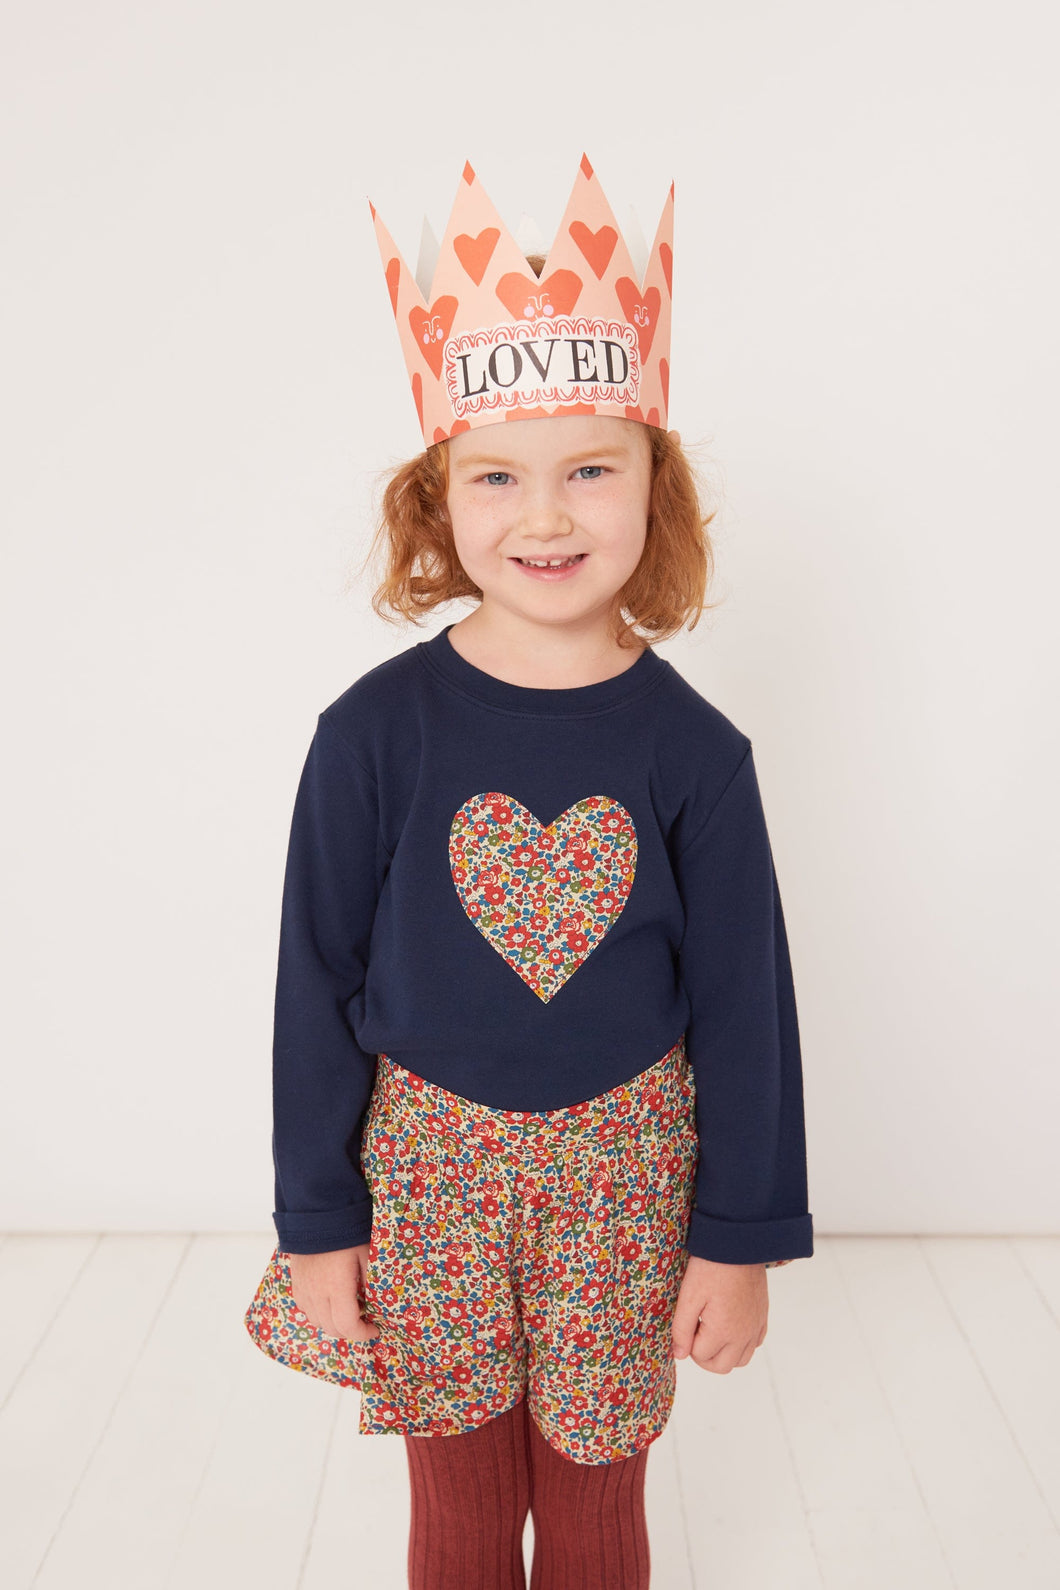 Magnificent Stanley Tee Heart T-Shirt in choice of Liberty Print